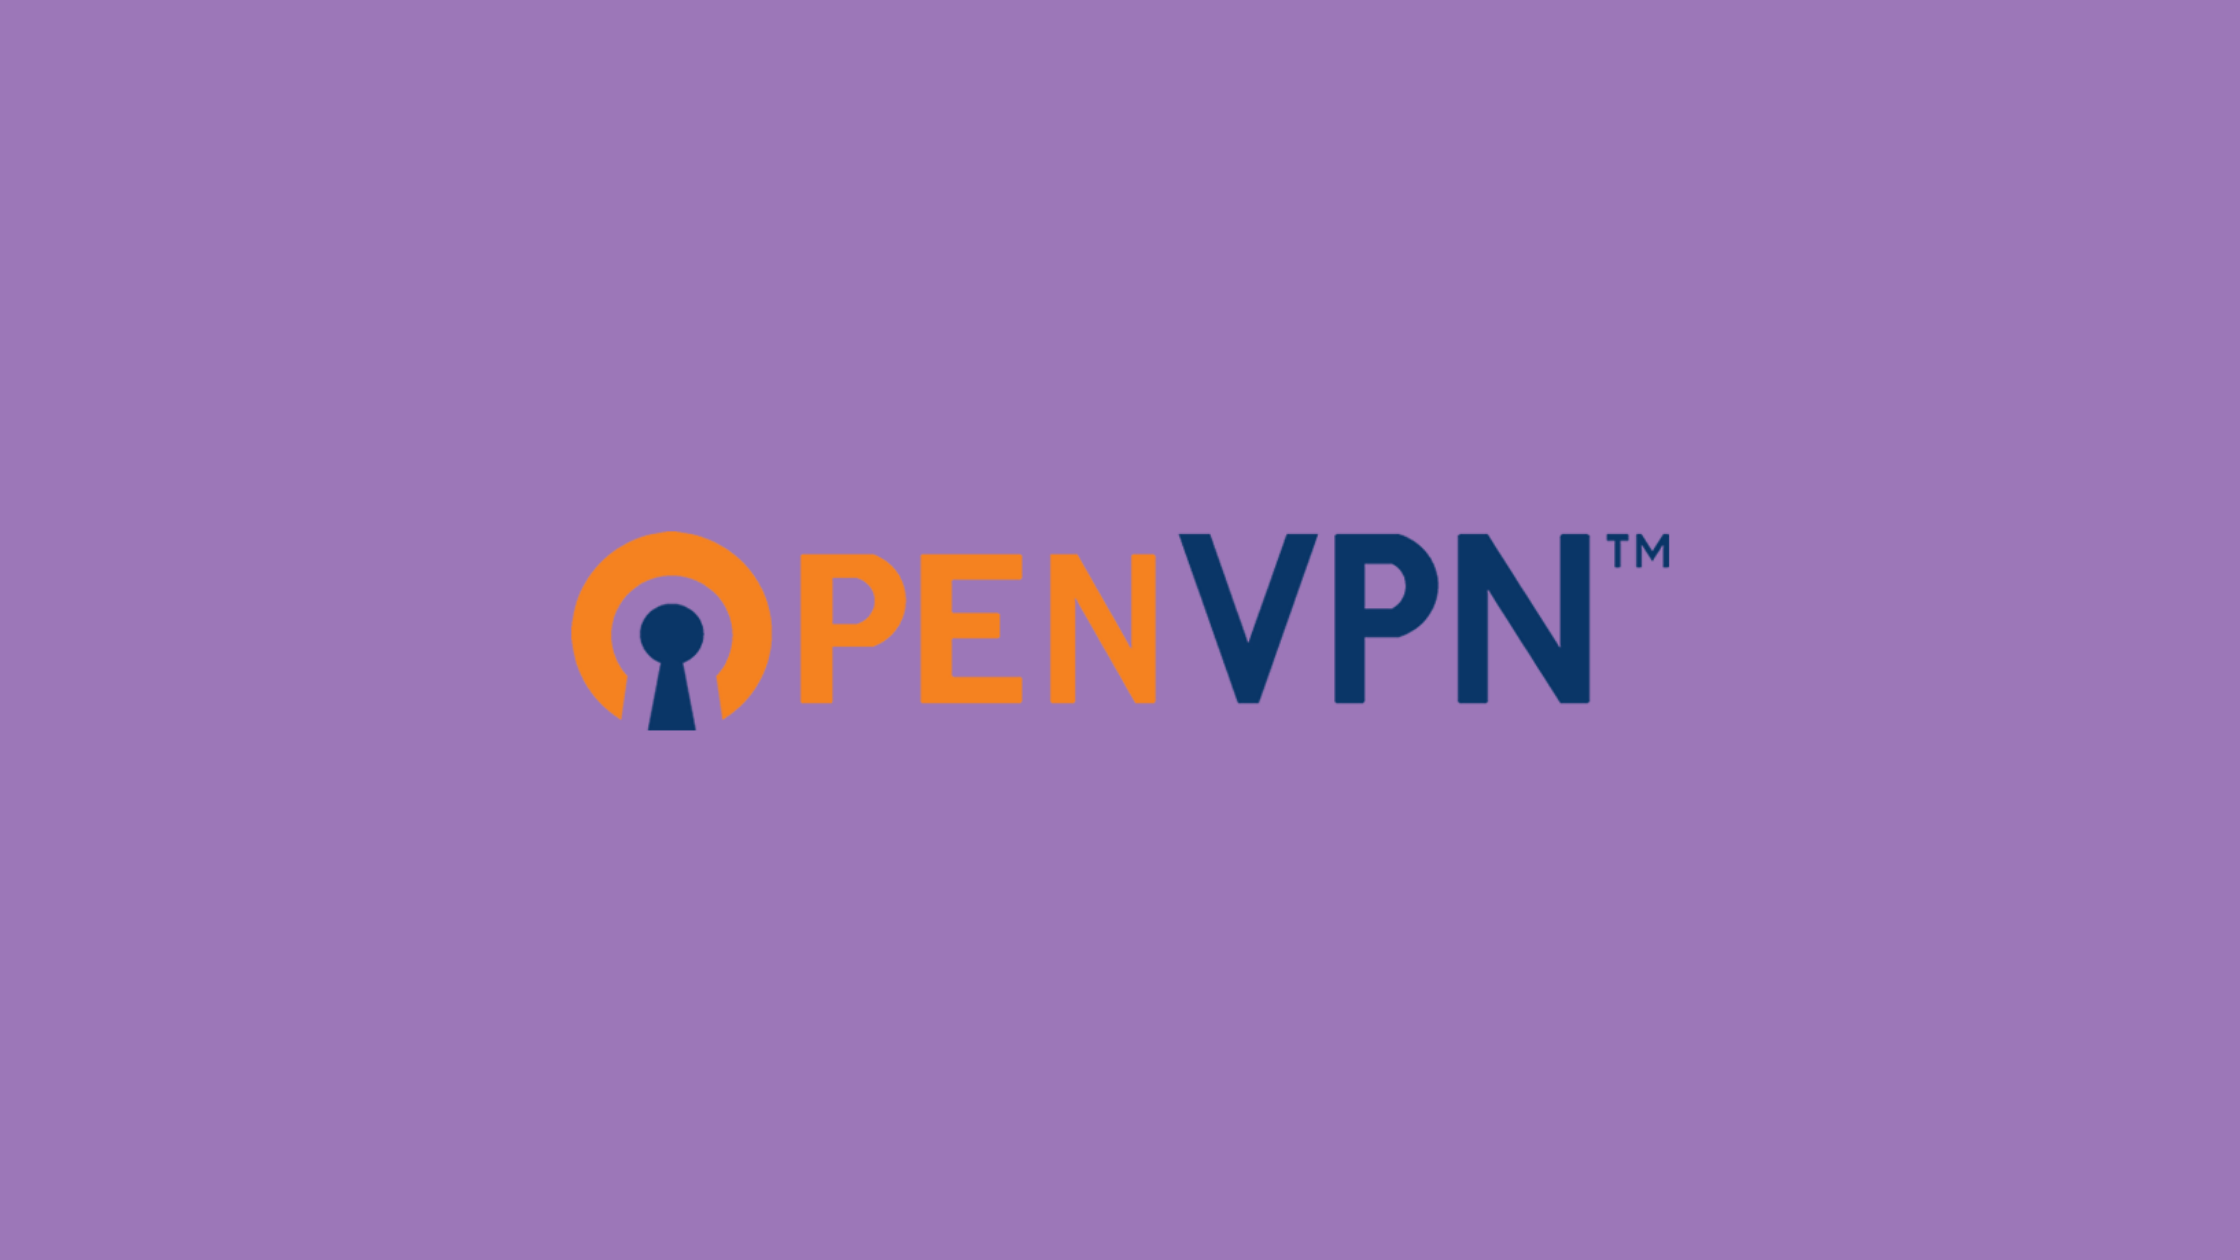 OpenVPN Access Server On AWS EC2 (Self-Hosted) With SSL